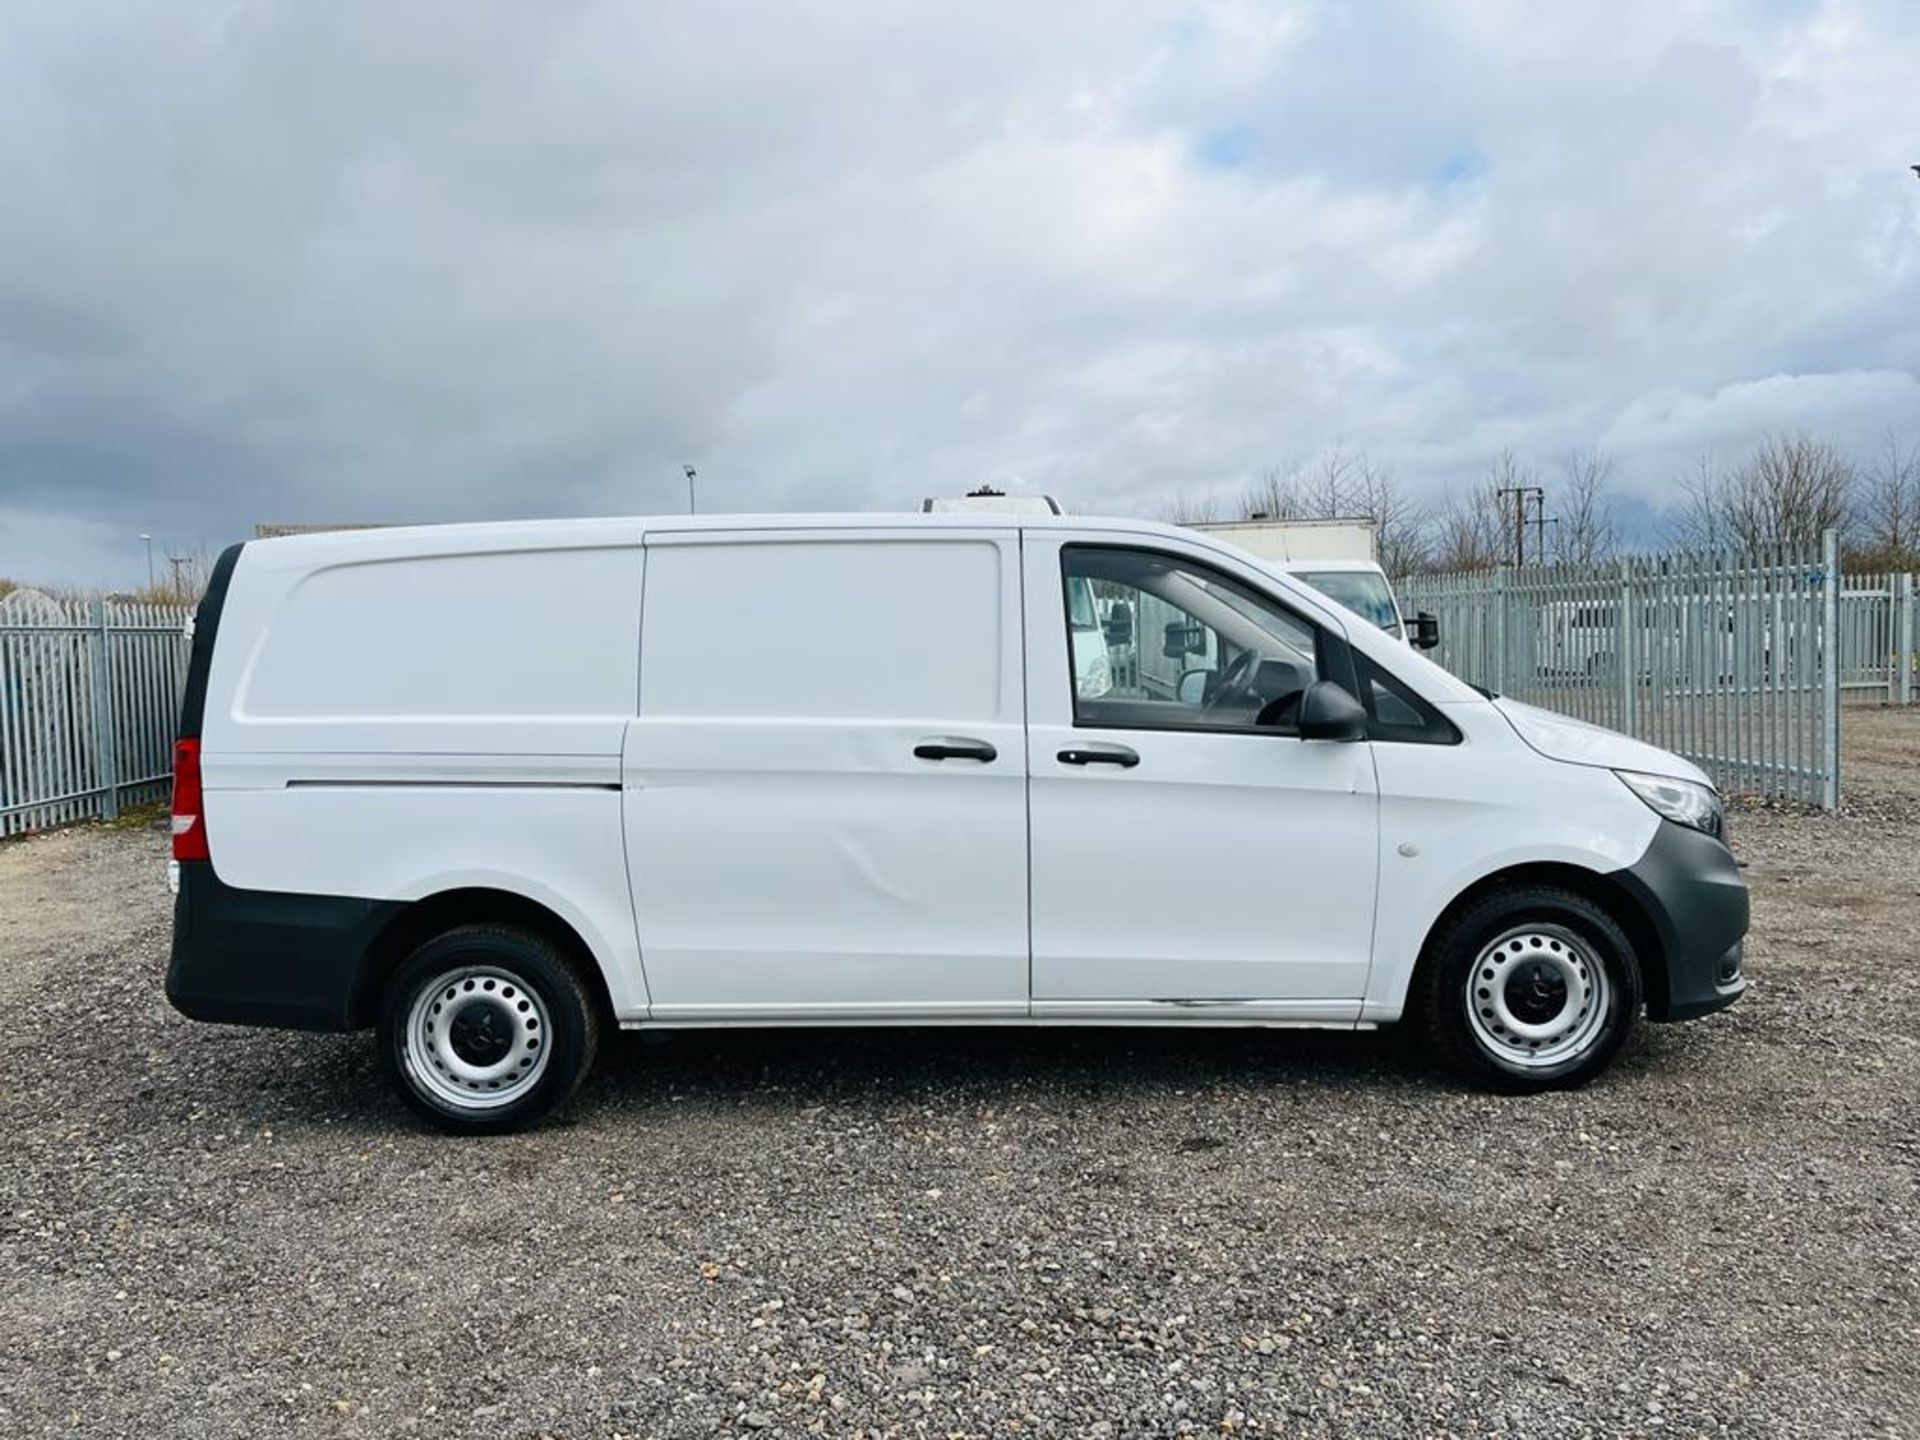 Mercedes Benz Vito 1.6 111 CDI FWD 2019 '19 Reg' - ULEZ Compliant - Only 85,733 Miles - Image 12 of 24